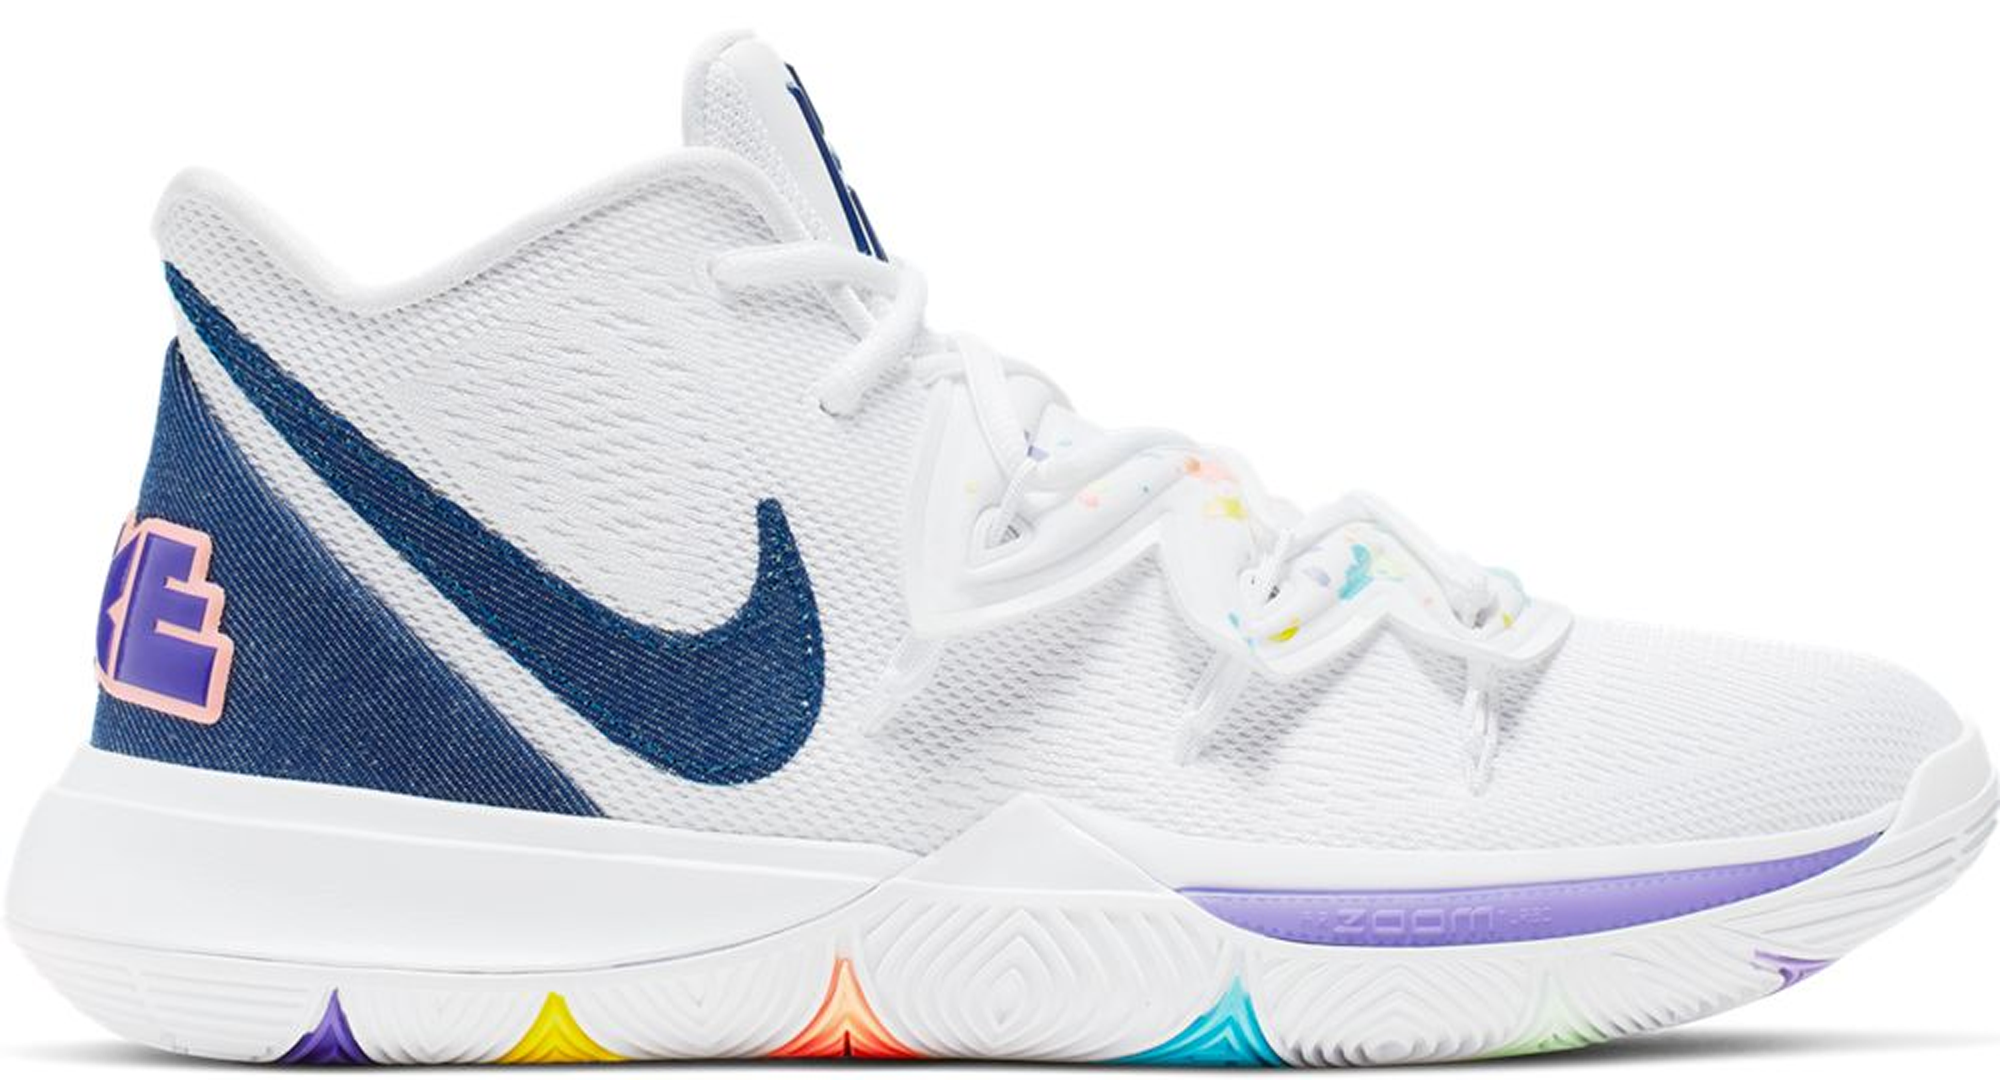 kyrie 5 royal blue and white